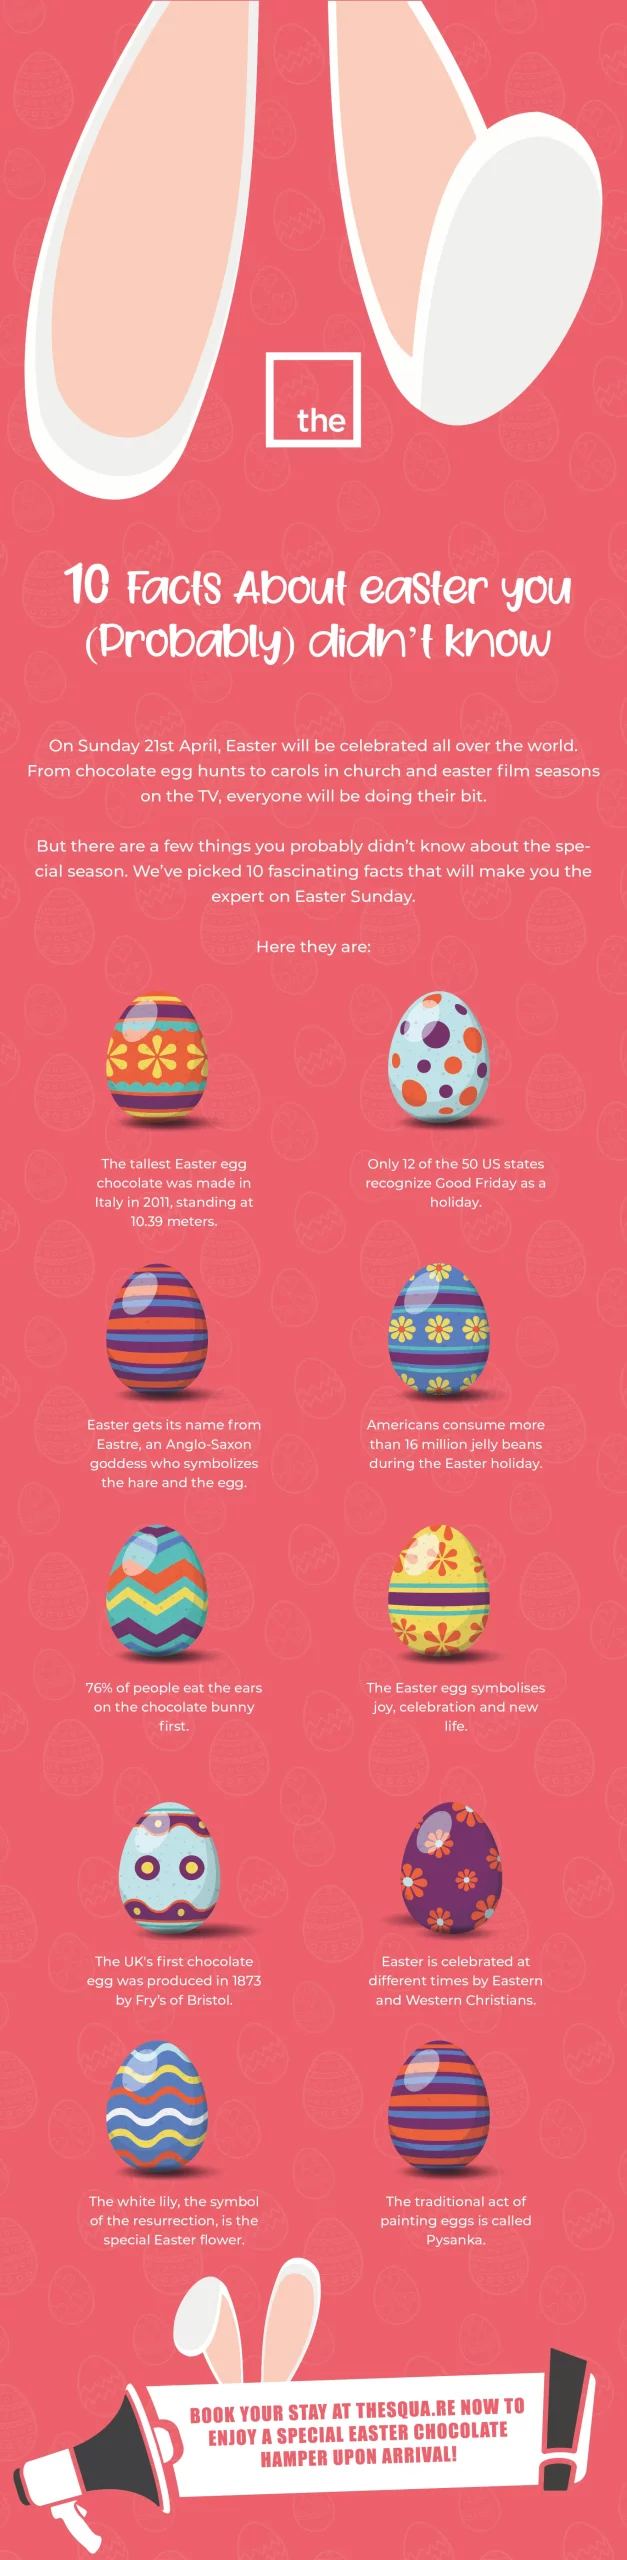 Easter Infographic 02 scaled